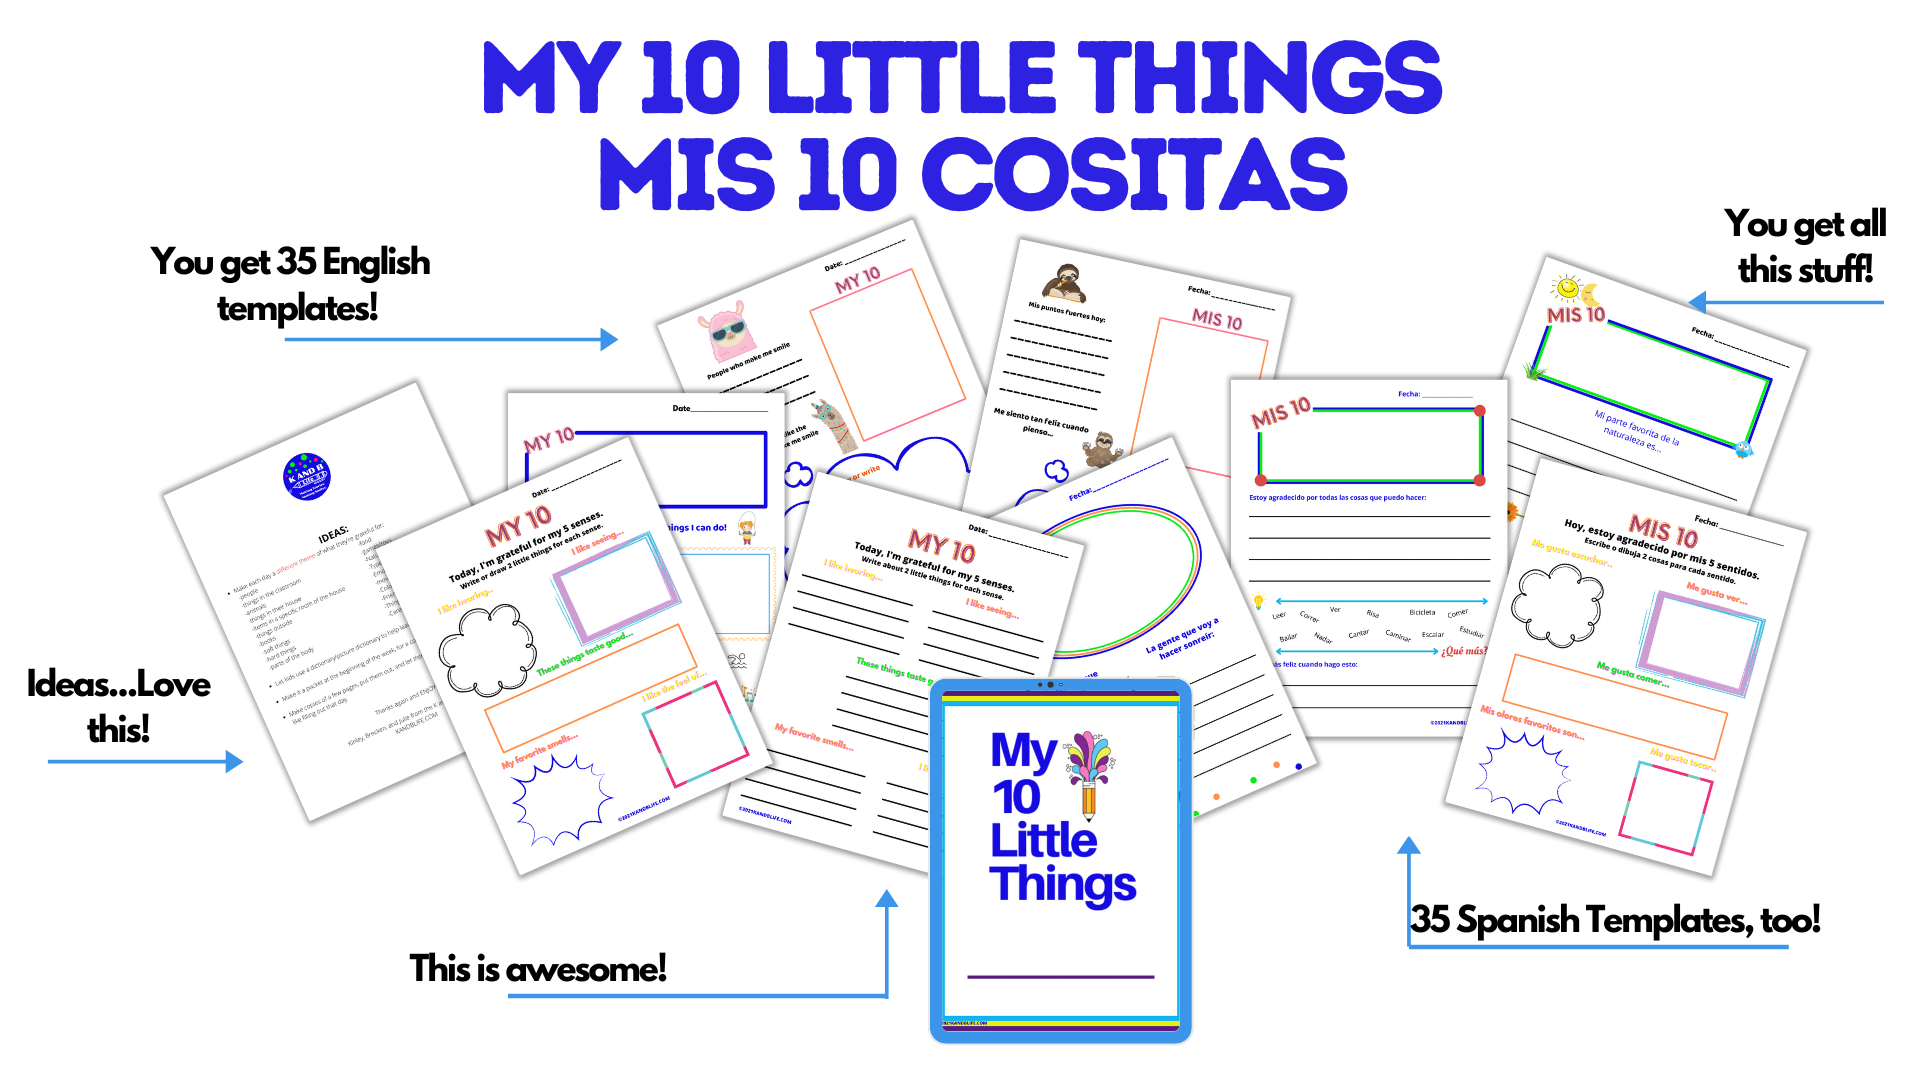 Sample pages for the English and Spanish gratitude journal, My 10 Little Things.